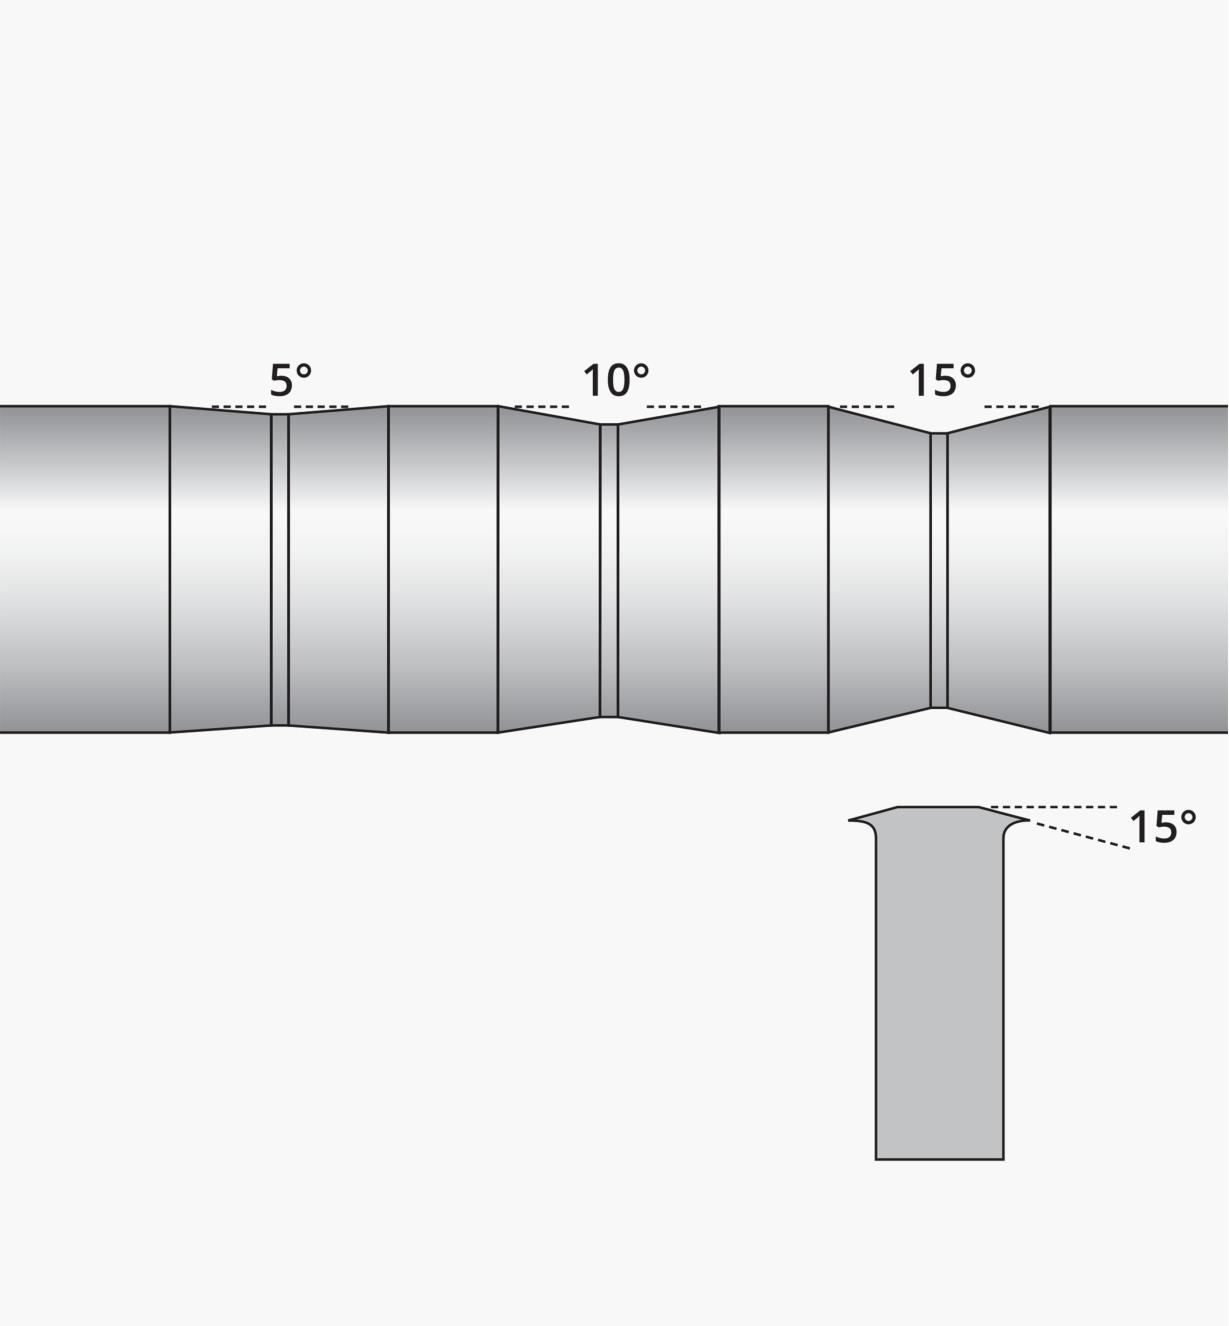 A diagram showing the 5°, 10° and 15° V-shaped grooves on an Accu-Burr burnisher